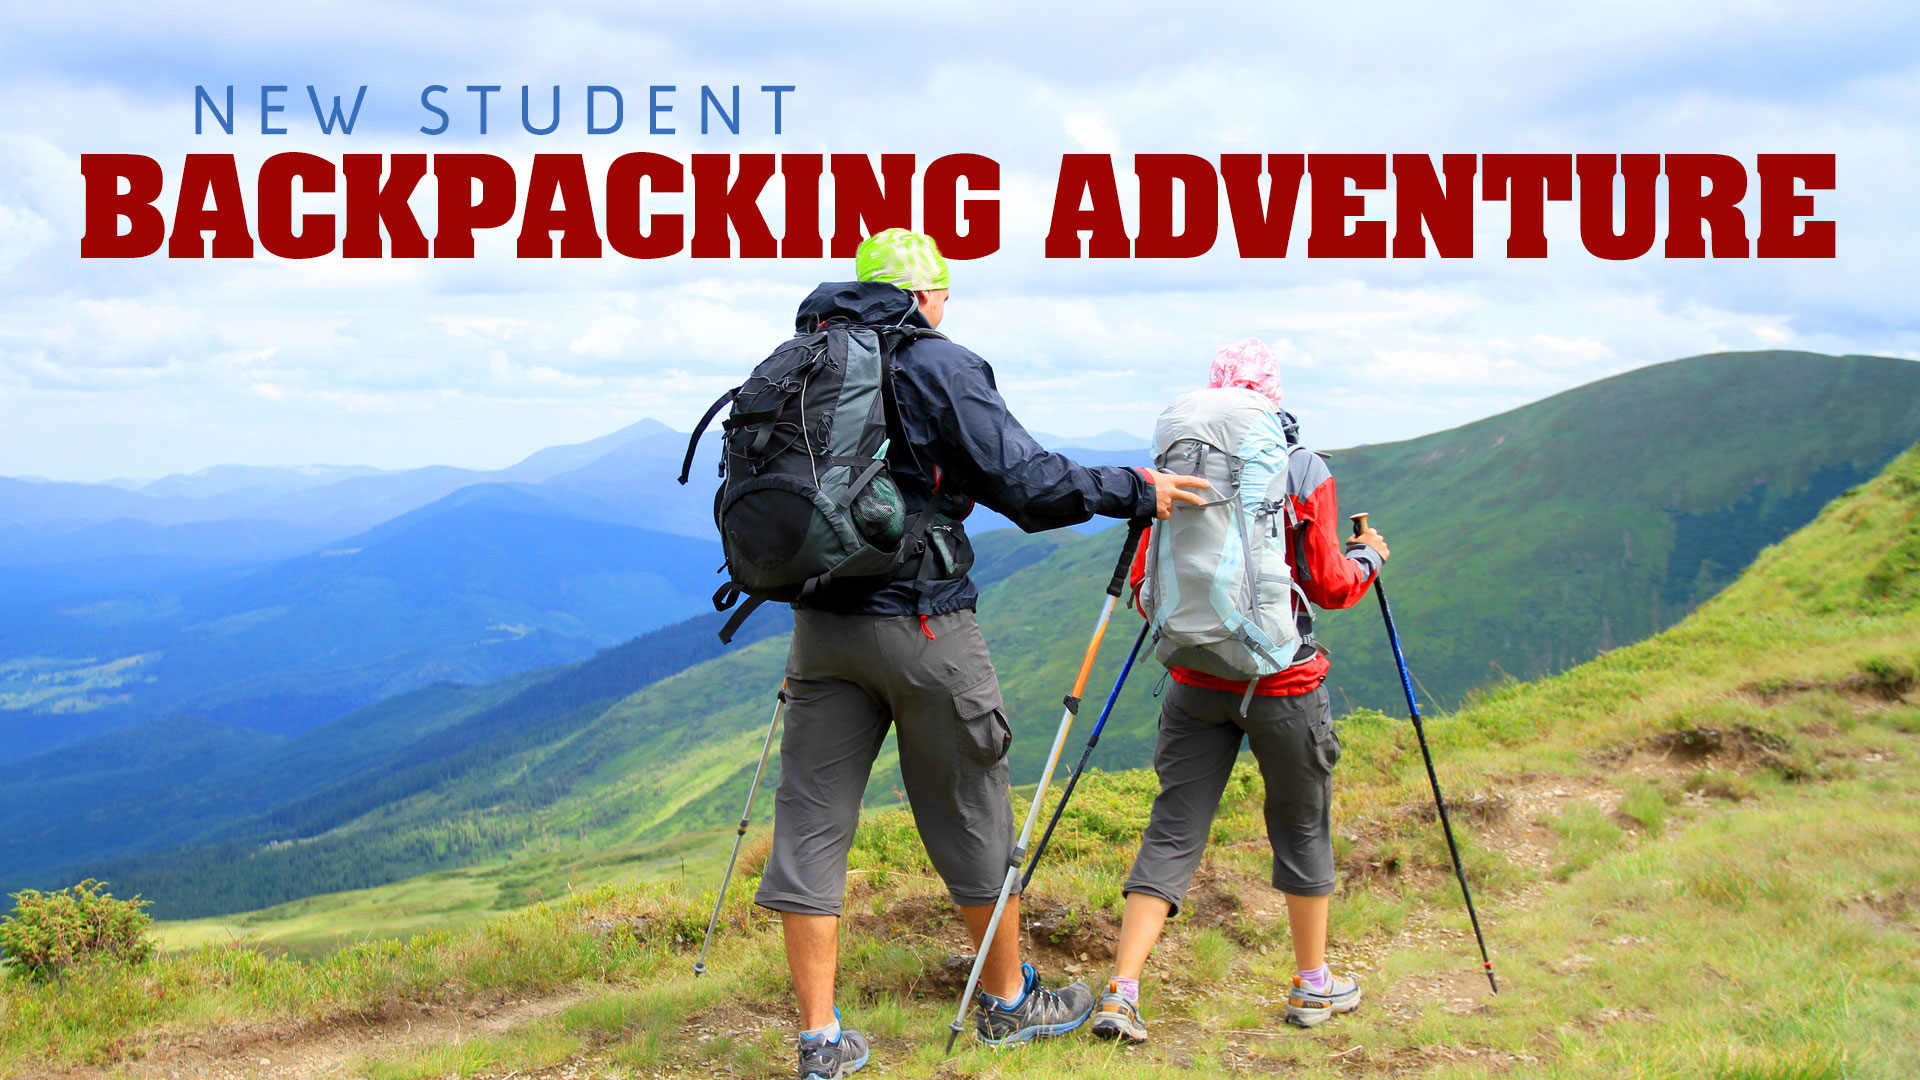 New Student Backpacking Adventure